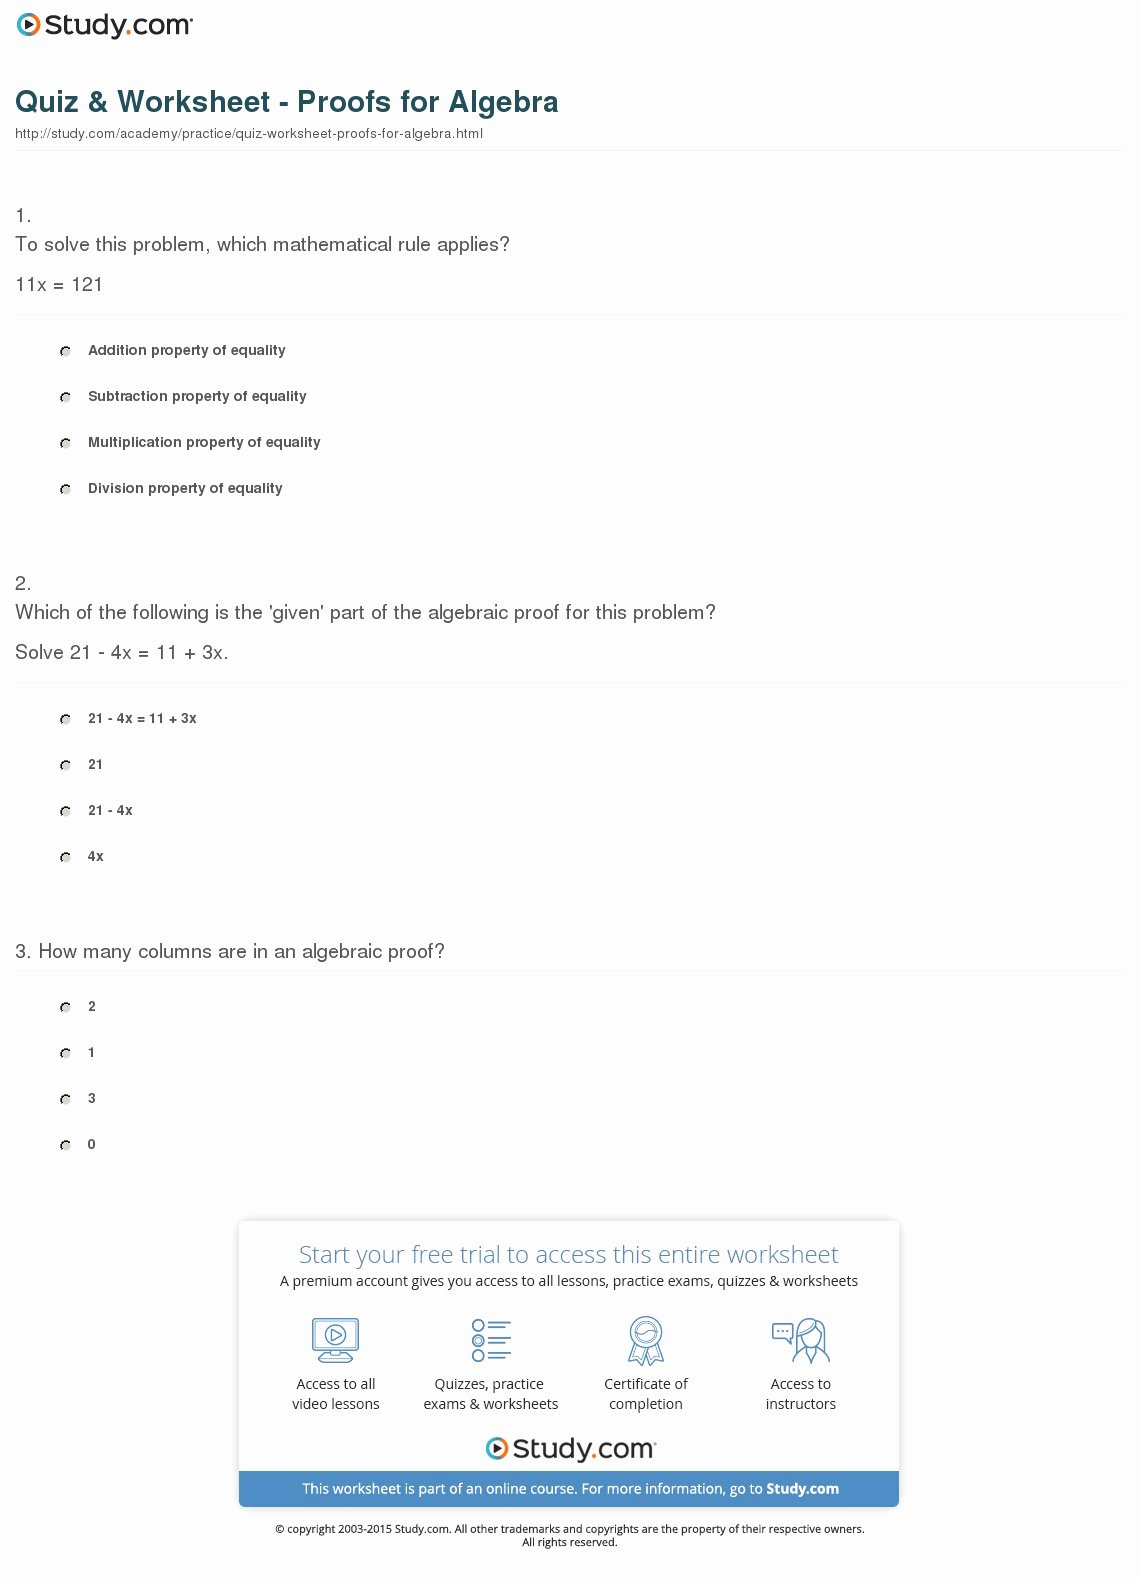 Algebraic Proofs Worksheet with Answers Best Of Quiz &amp; Worksheet Proofs for Algebra